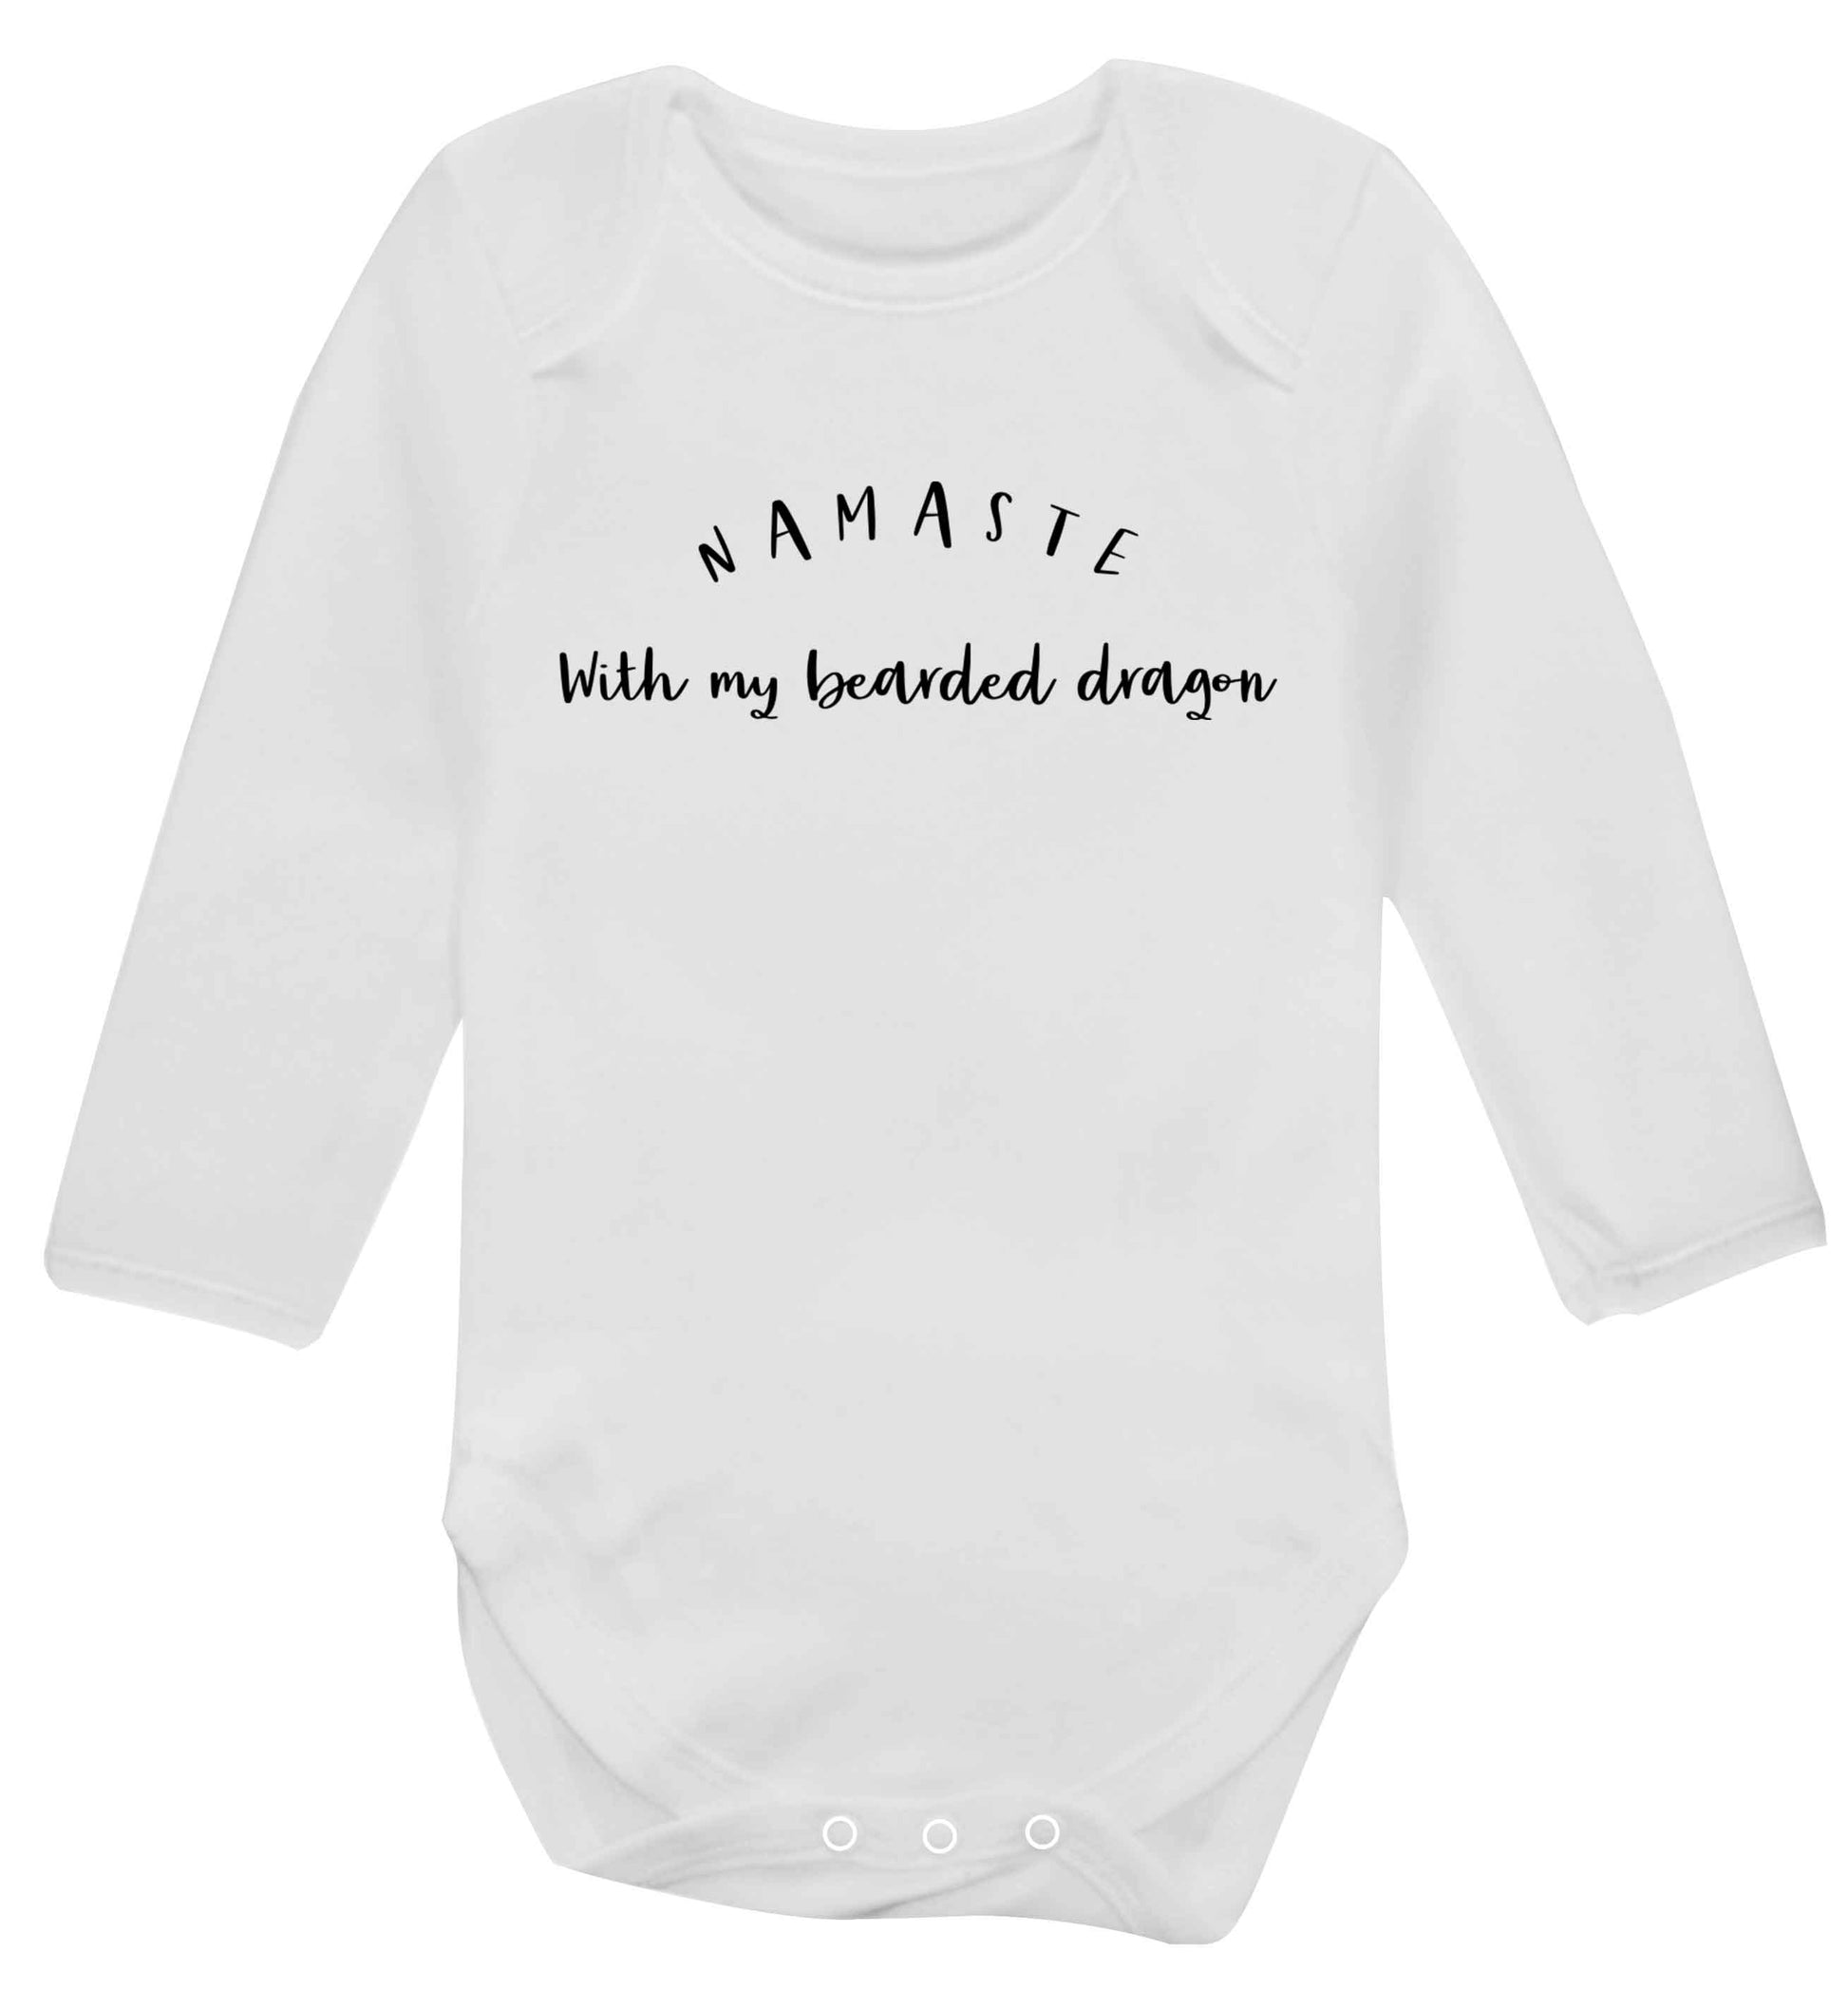 Namaste with my bearded dragon Baby Vest long sleeved white 6-12 months